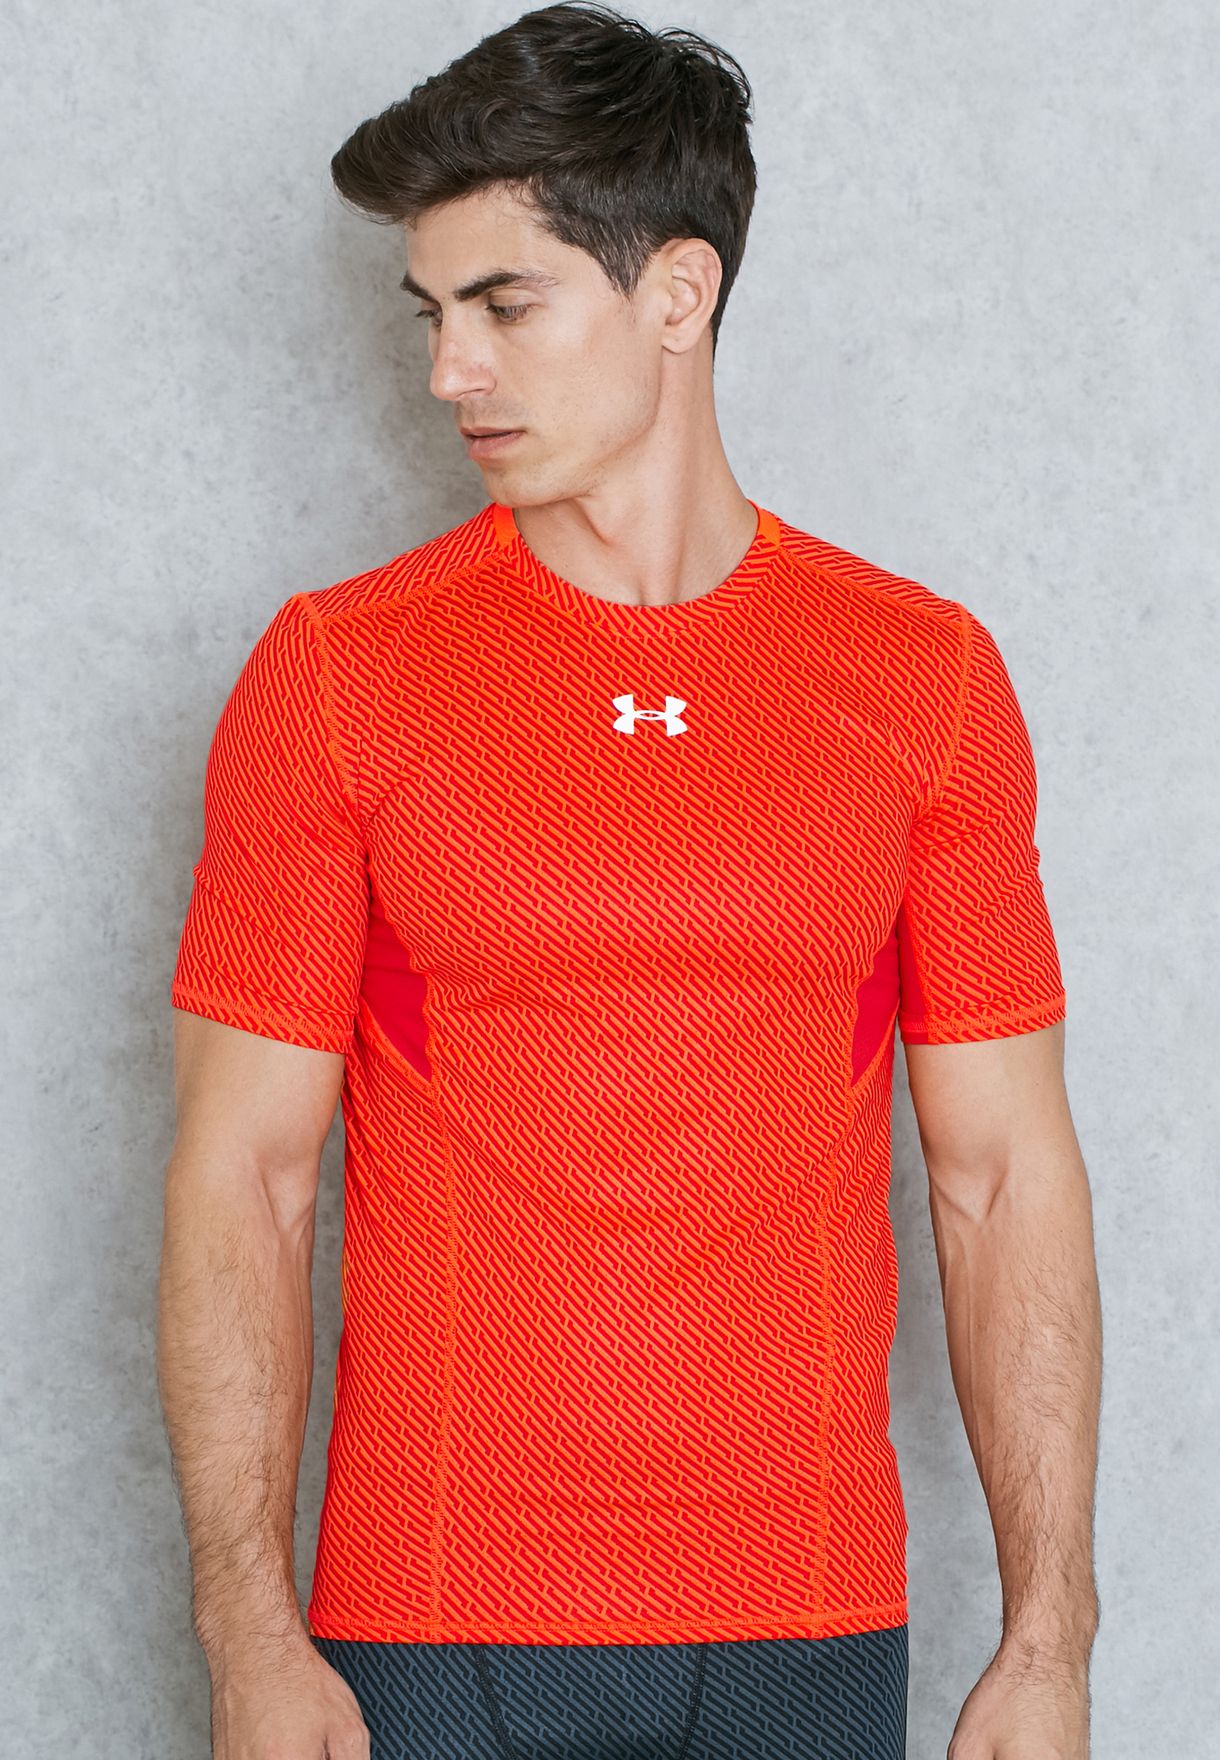 under armour coolswitch t shirt